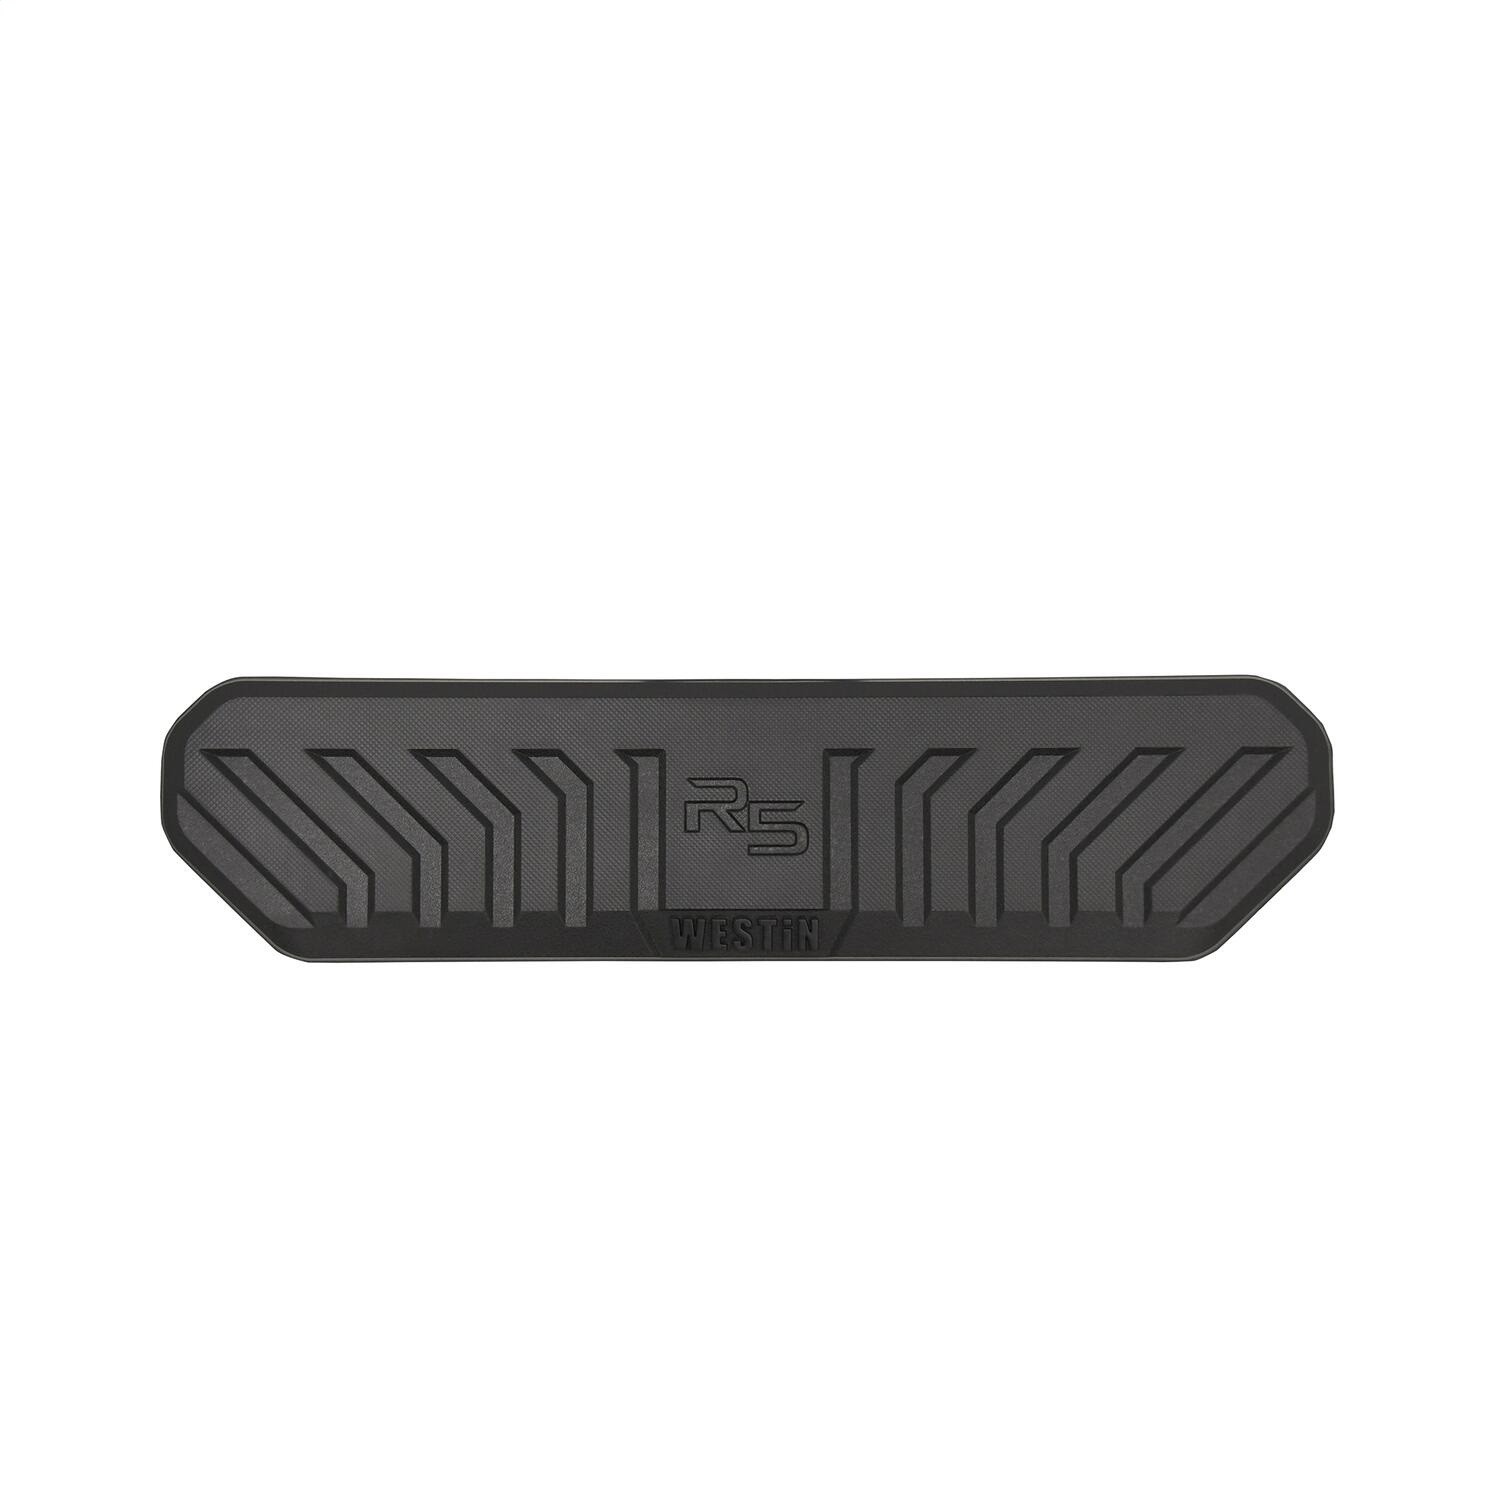 Westin 28-50002 R5 Replacement Step Pad Kit